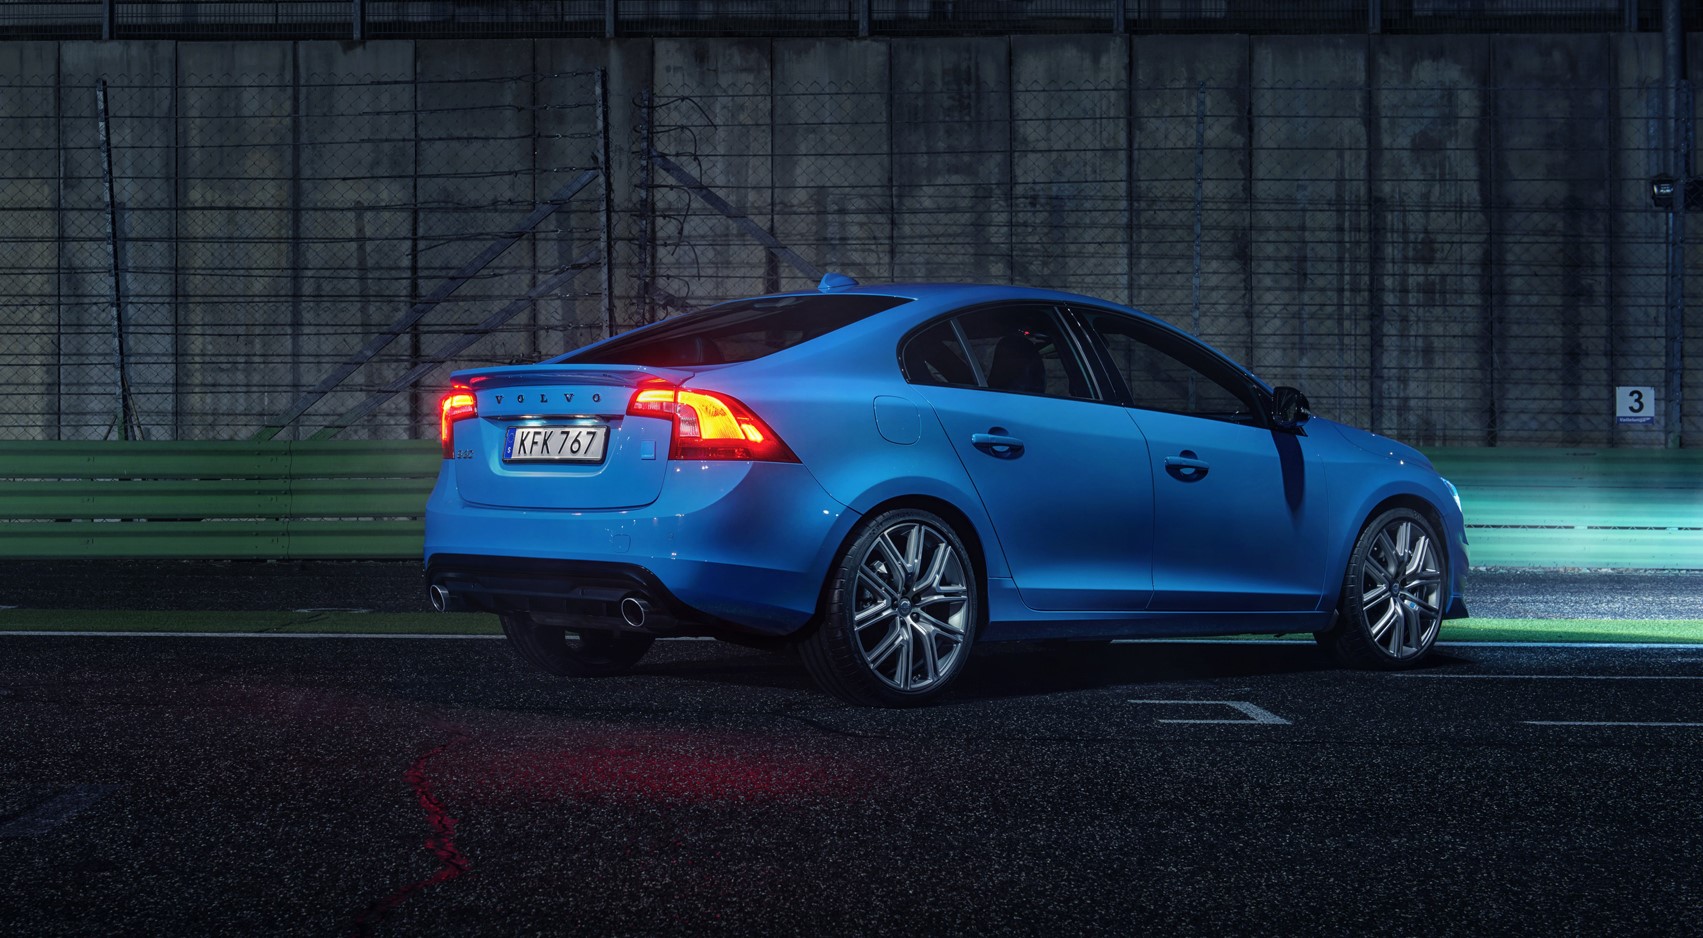  2017 Volvo S60 Polestar Launched in India Side Rear Profile